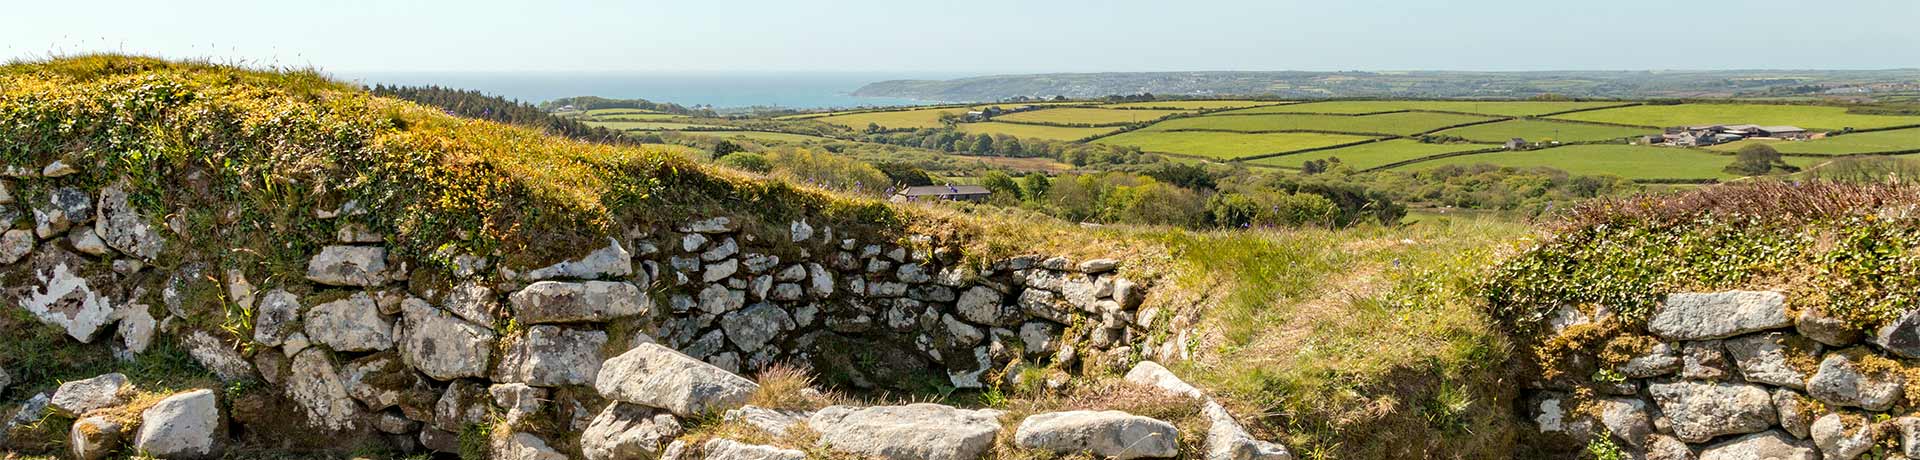 Ancient villages in Cornwall